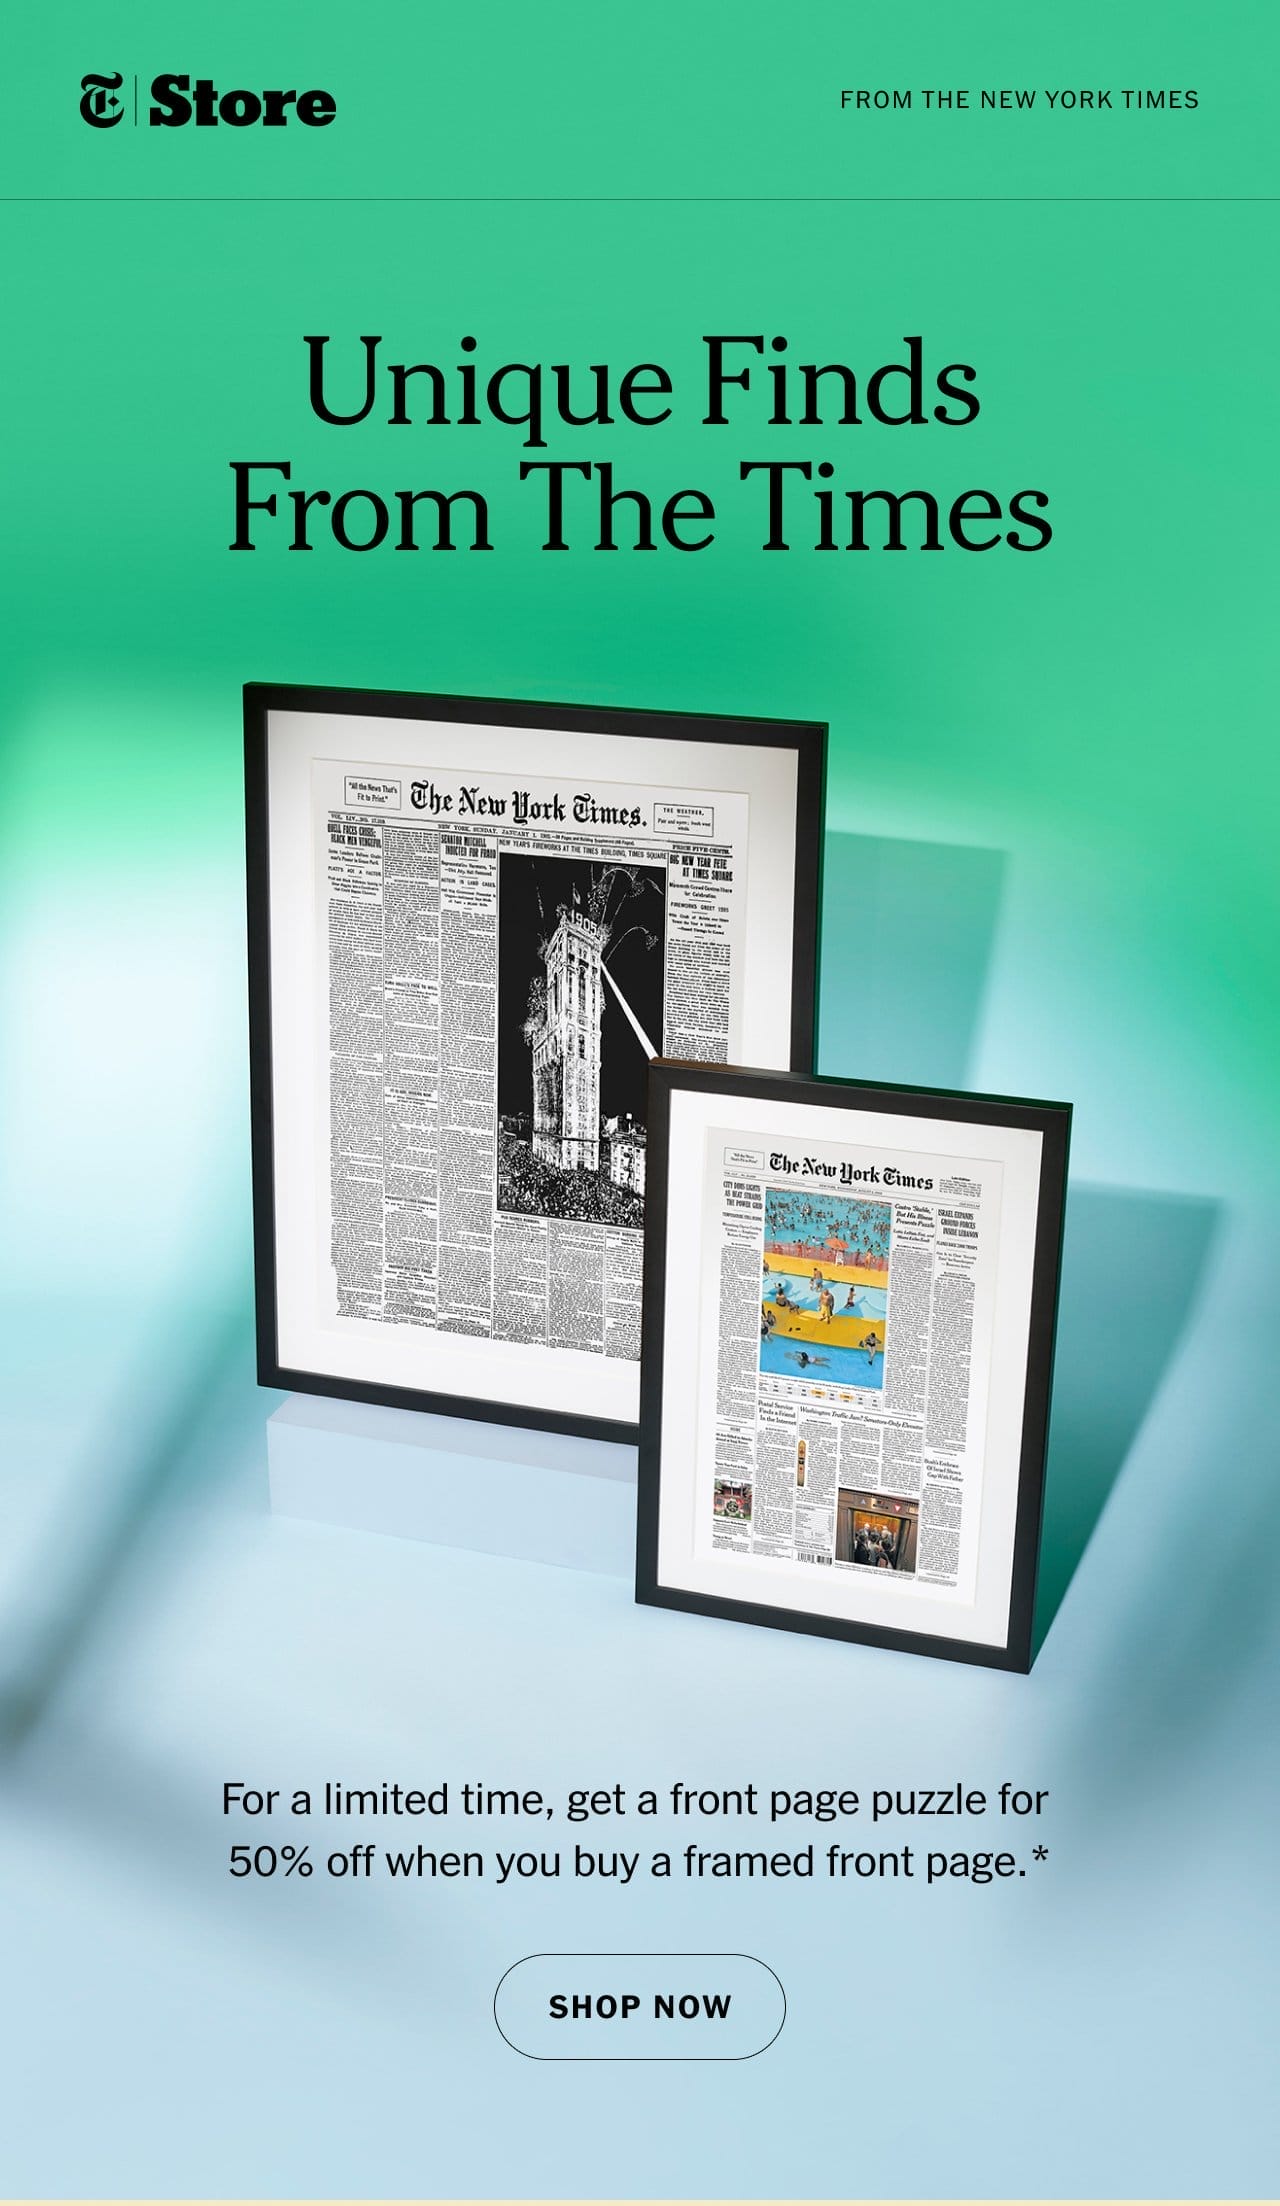 Unique Finds From The Times. For a limited time, get a front page puzzle for 50% off when you buy a framed front page.* Shop Now.